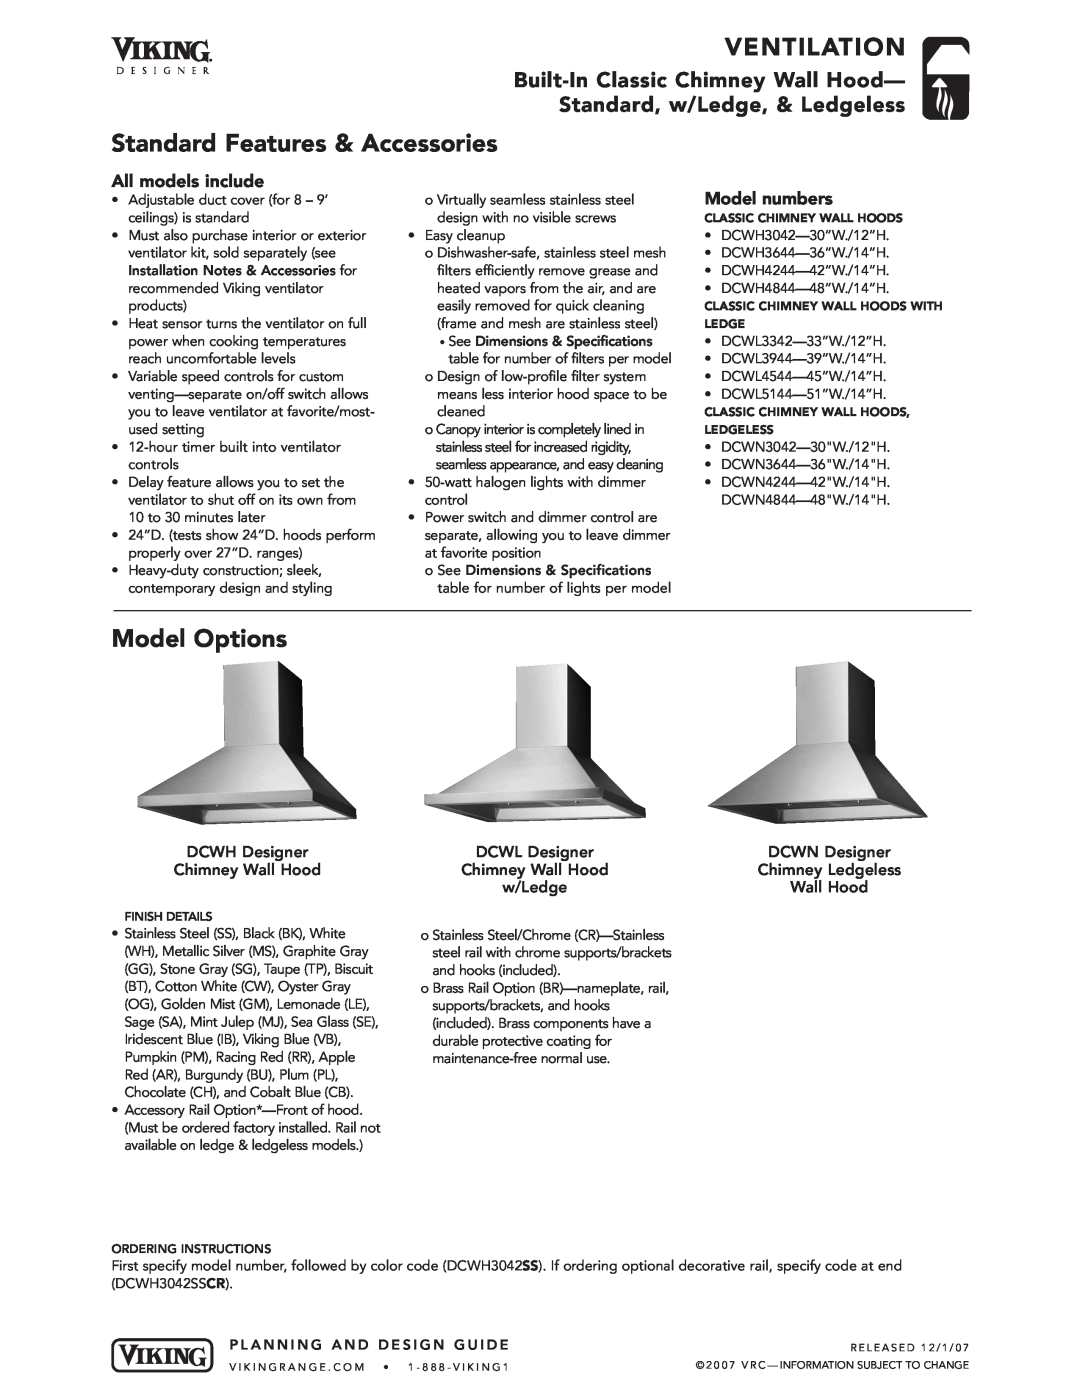 Viking DCWL dimensions Ventilation, Standard Features & Accessories, Model Options, All models include, Model numbers 